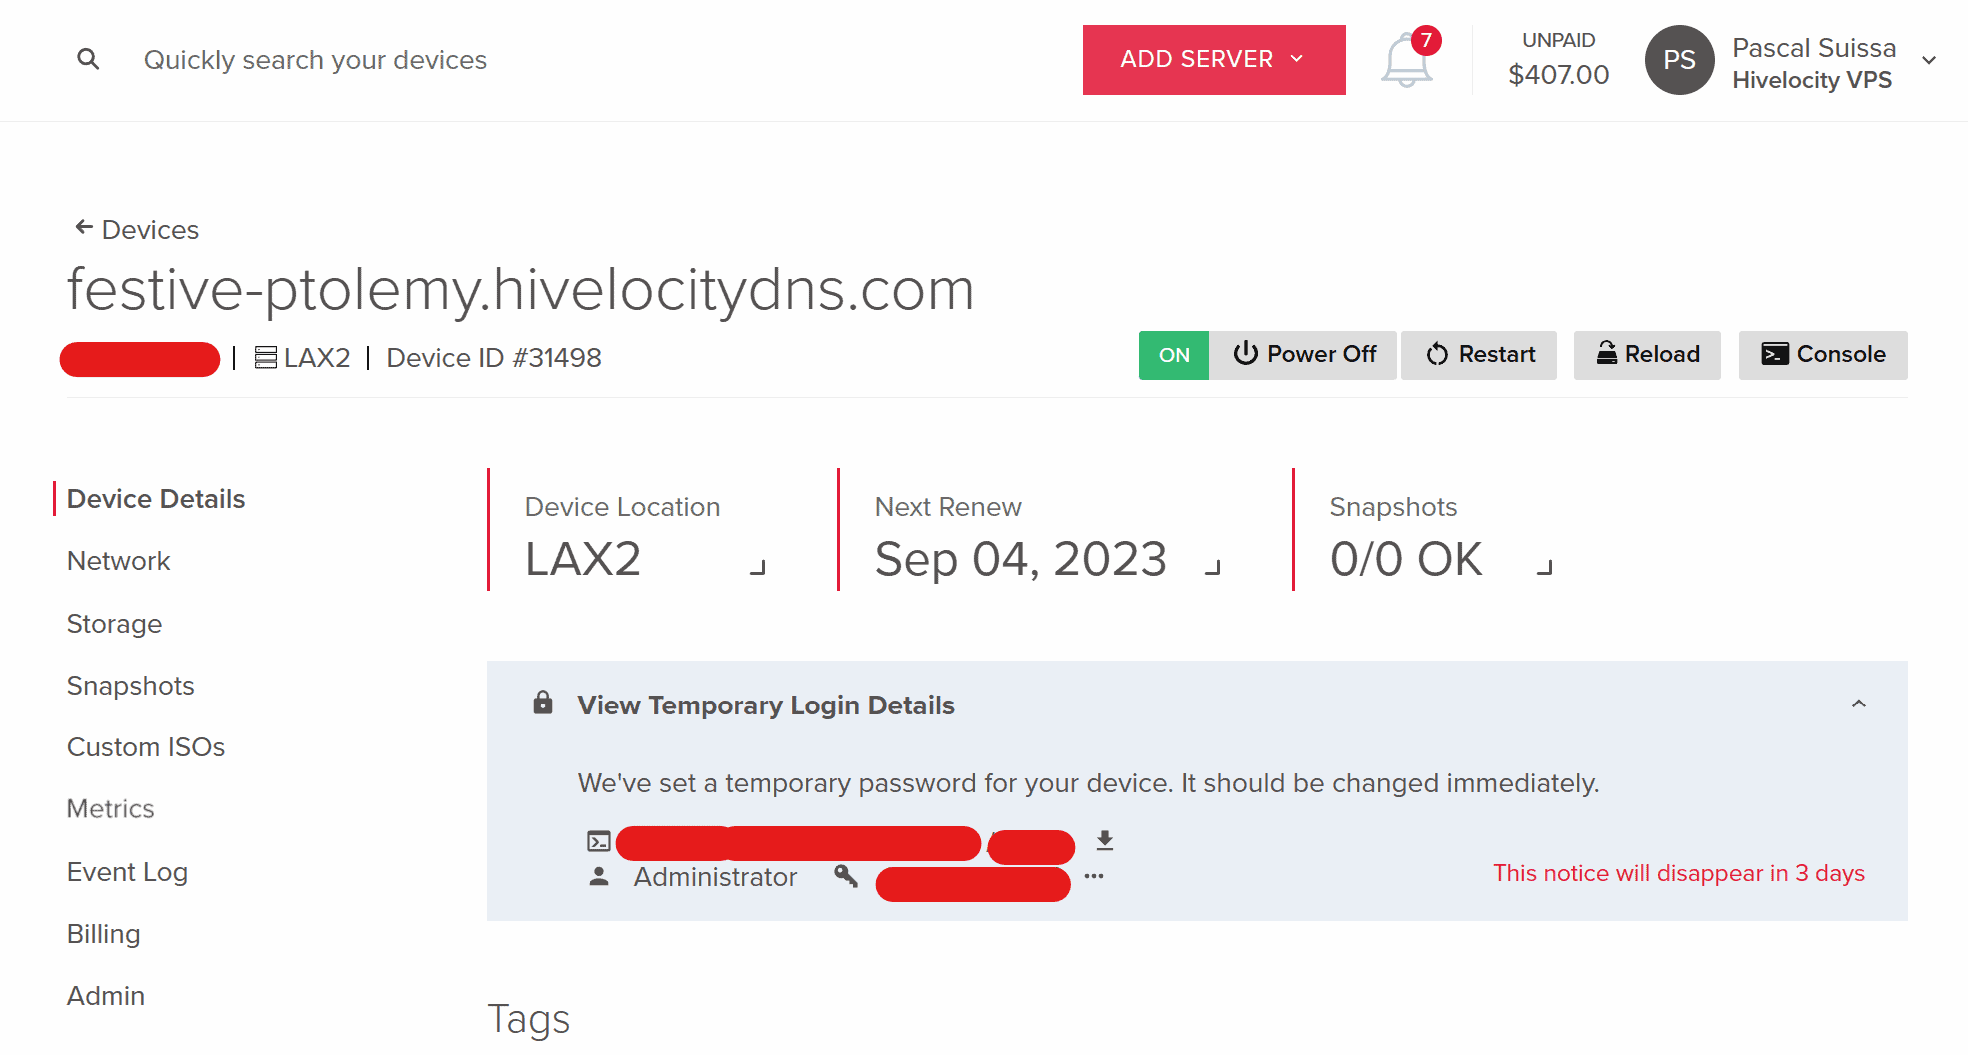 Screenshot showing Temporary Login details within the Device Details tab in myVelocity.